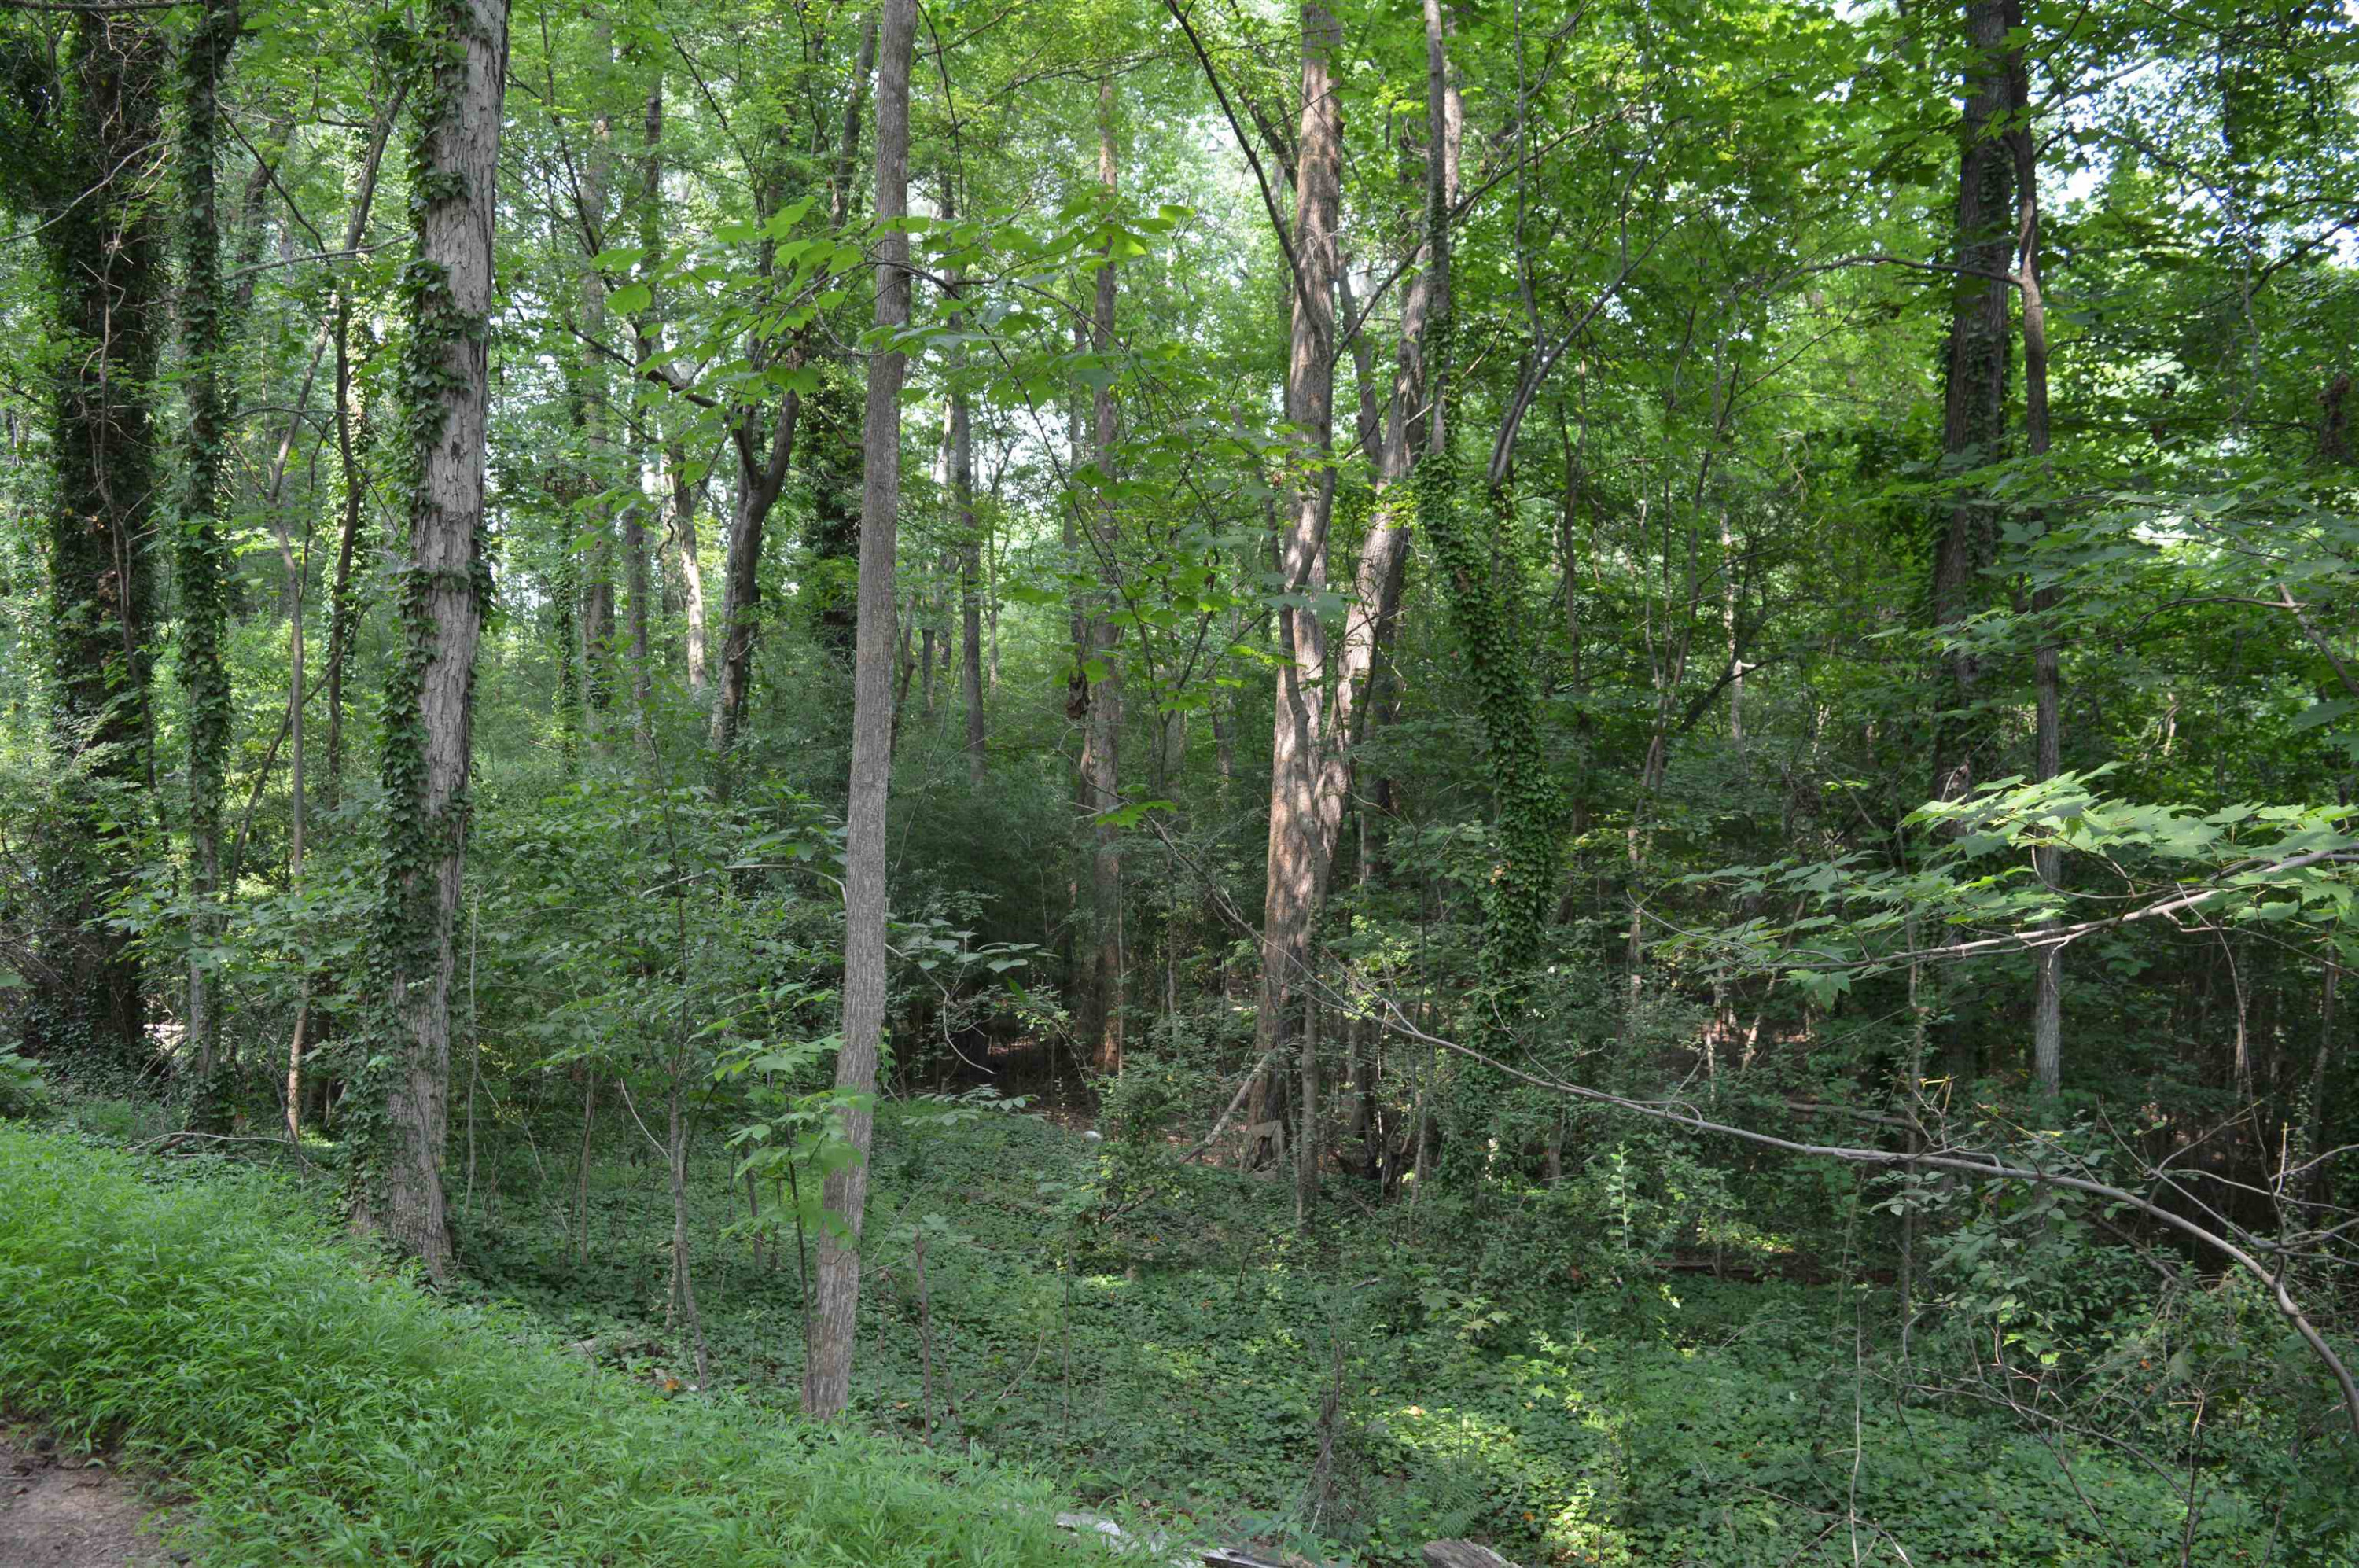 a view of a forest that has large trees